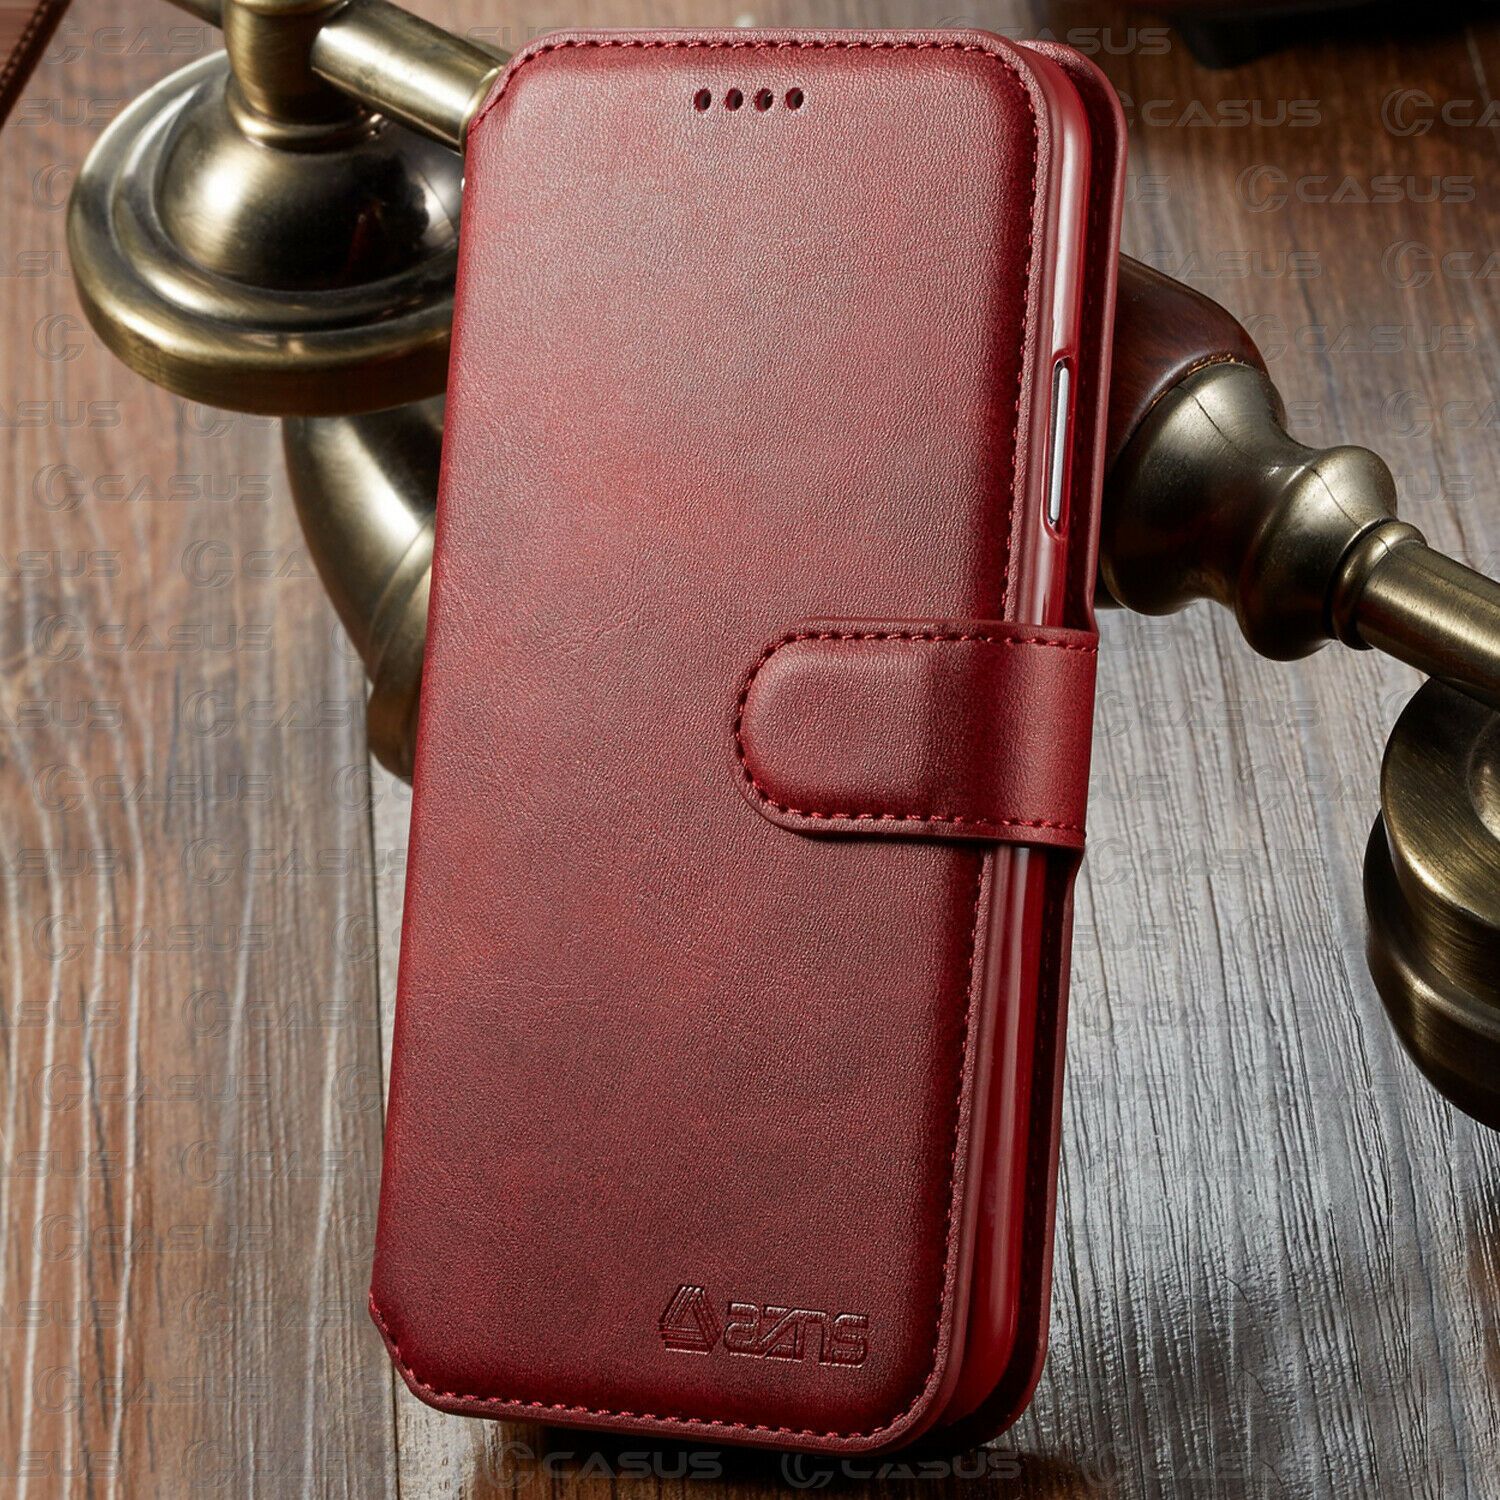 Leather Wallet Flip Card Holder Cover Case For iPhone 11 PRO MAX XR XS 8/6 Plus casuscasescasuscases For Apple iPhone 11 Red 